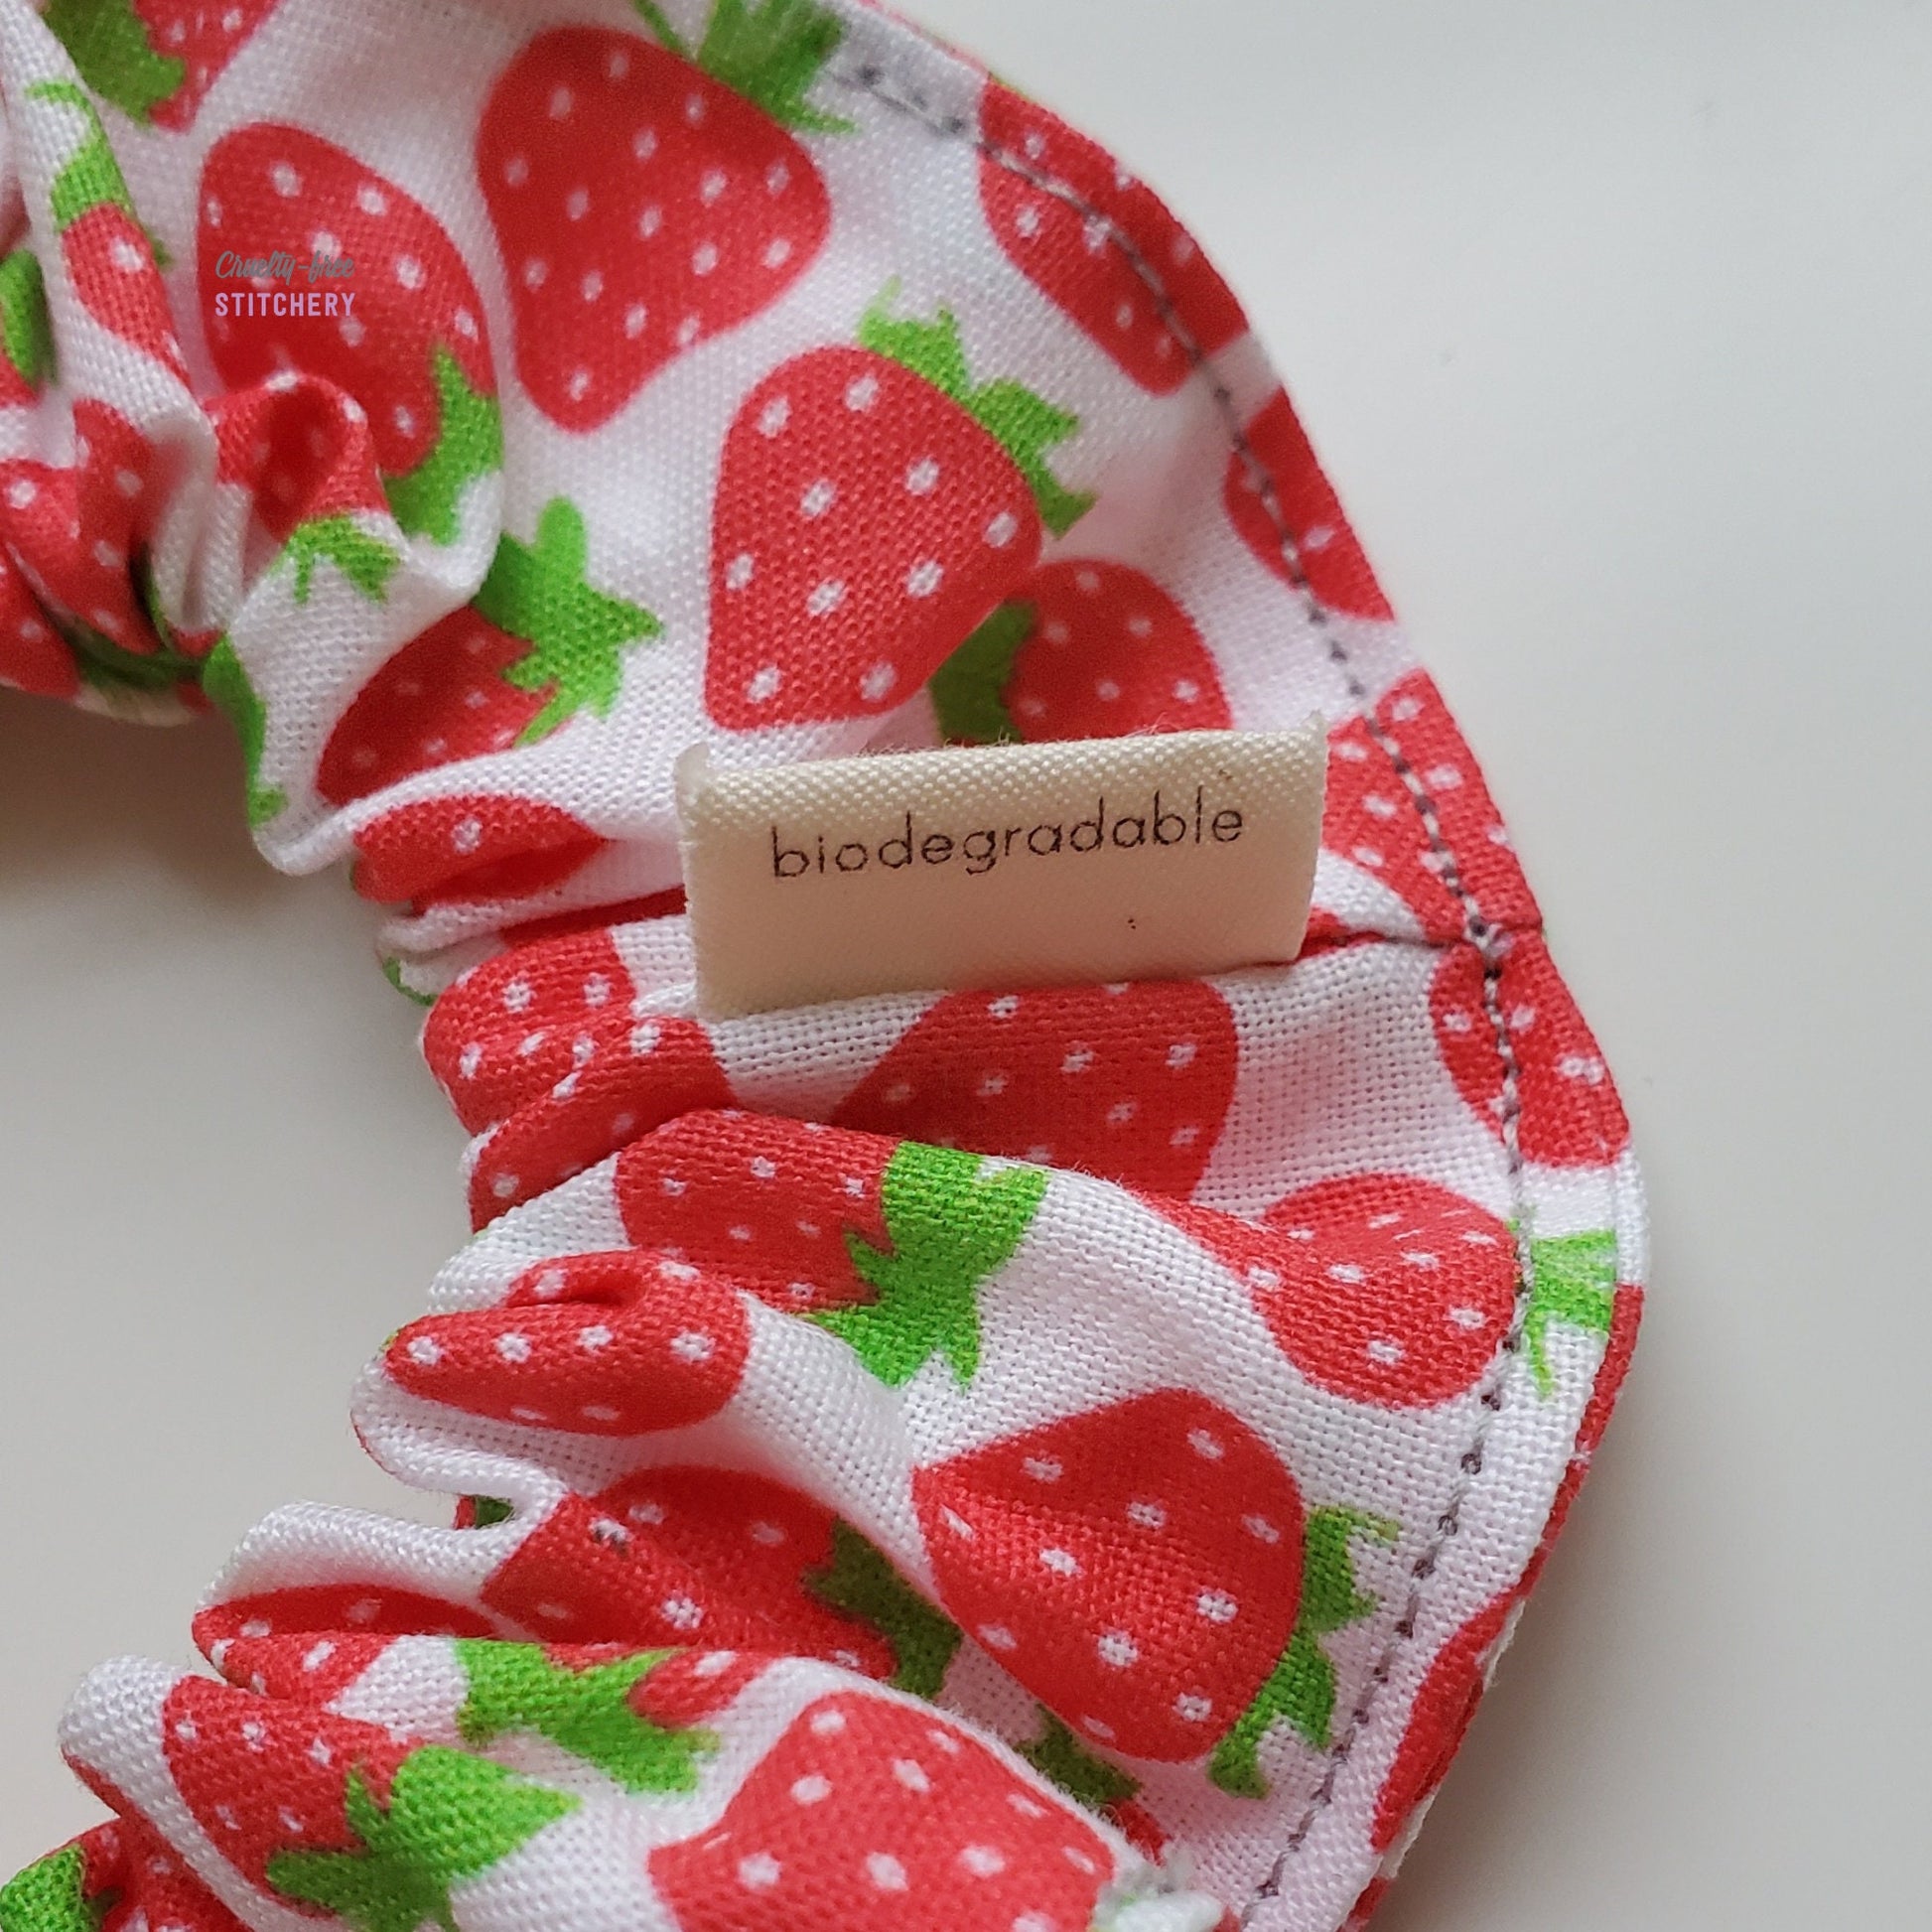 Close-up image of the scrunchie with the back side of the small tag, with the word "biodegradable" printed on it.